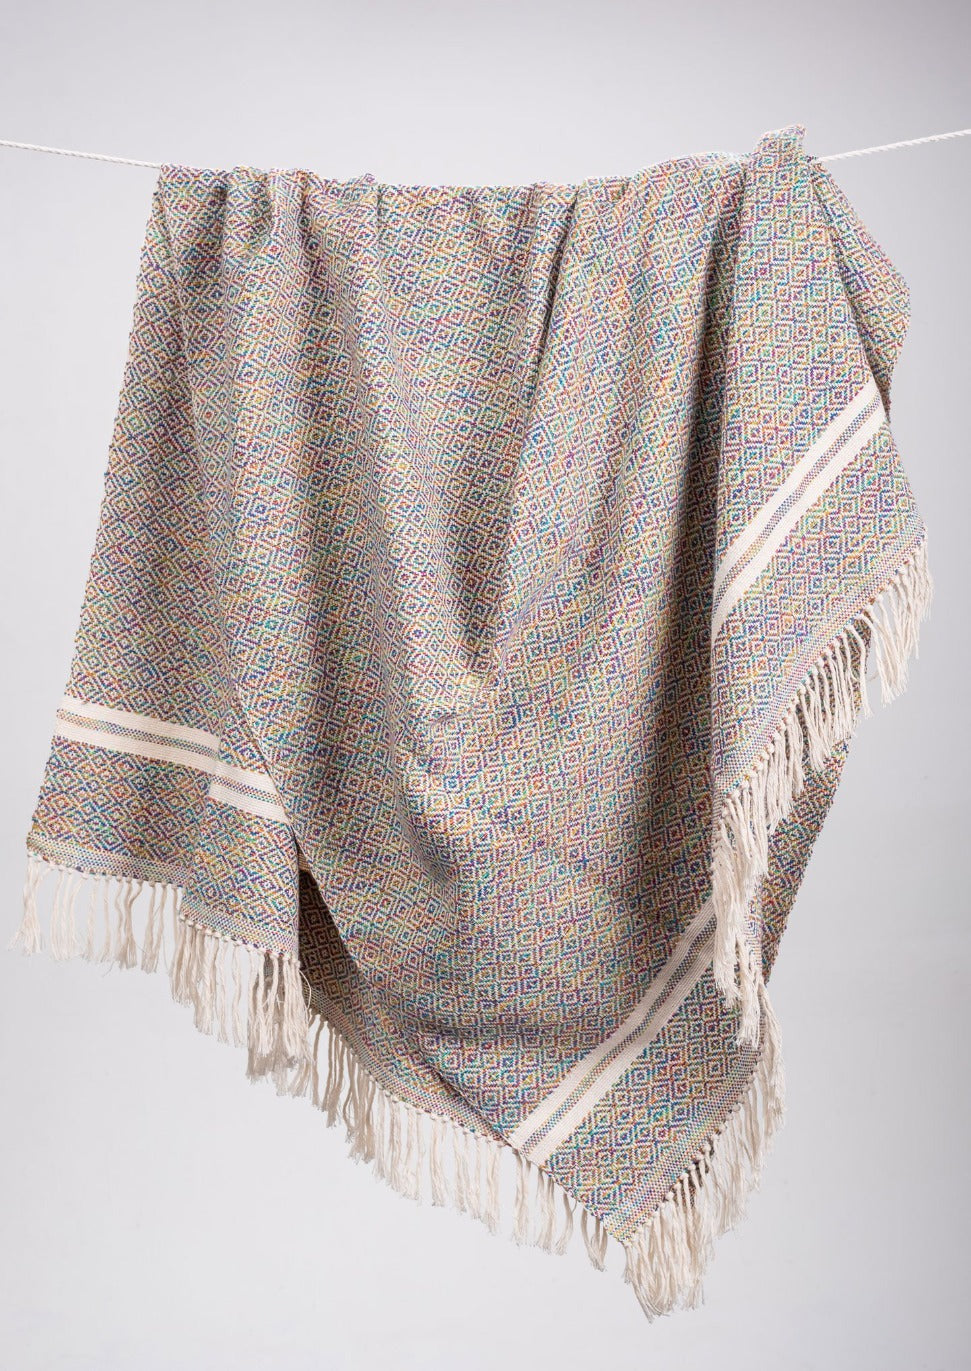 Diamante Striped Cotton Throws & Blankets in Hue Inspired Tones